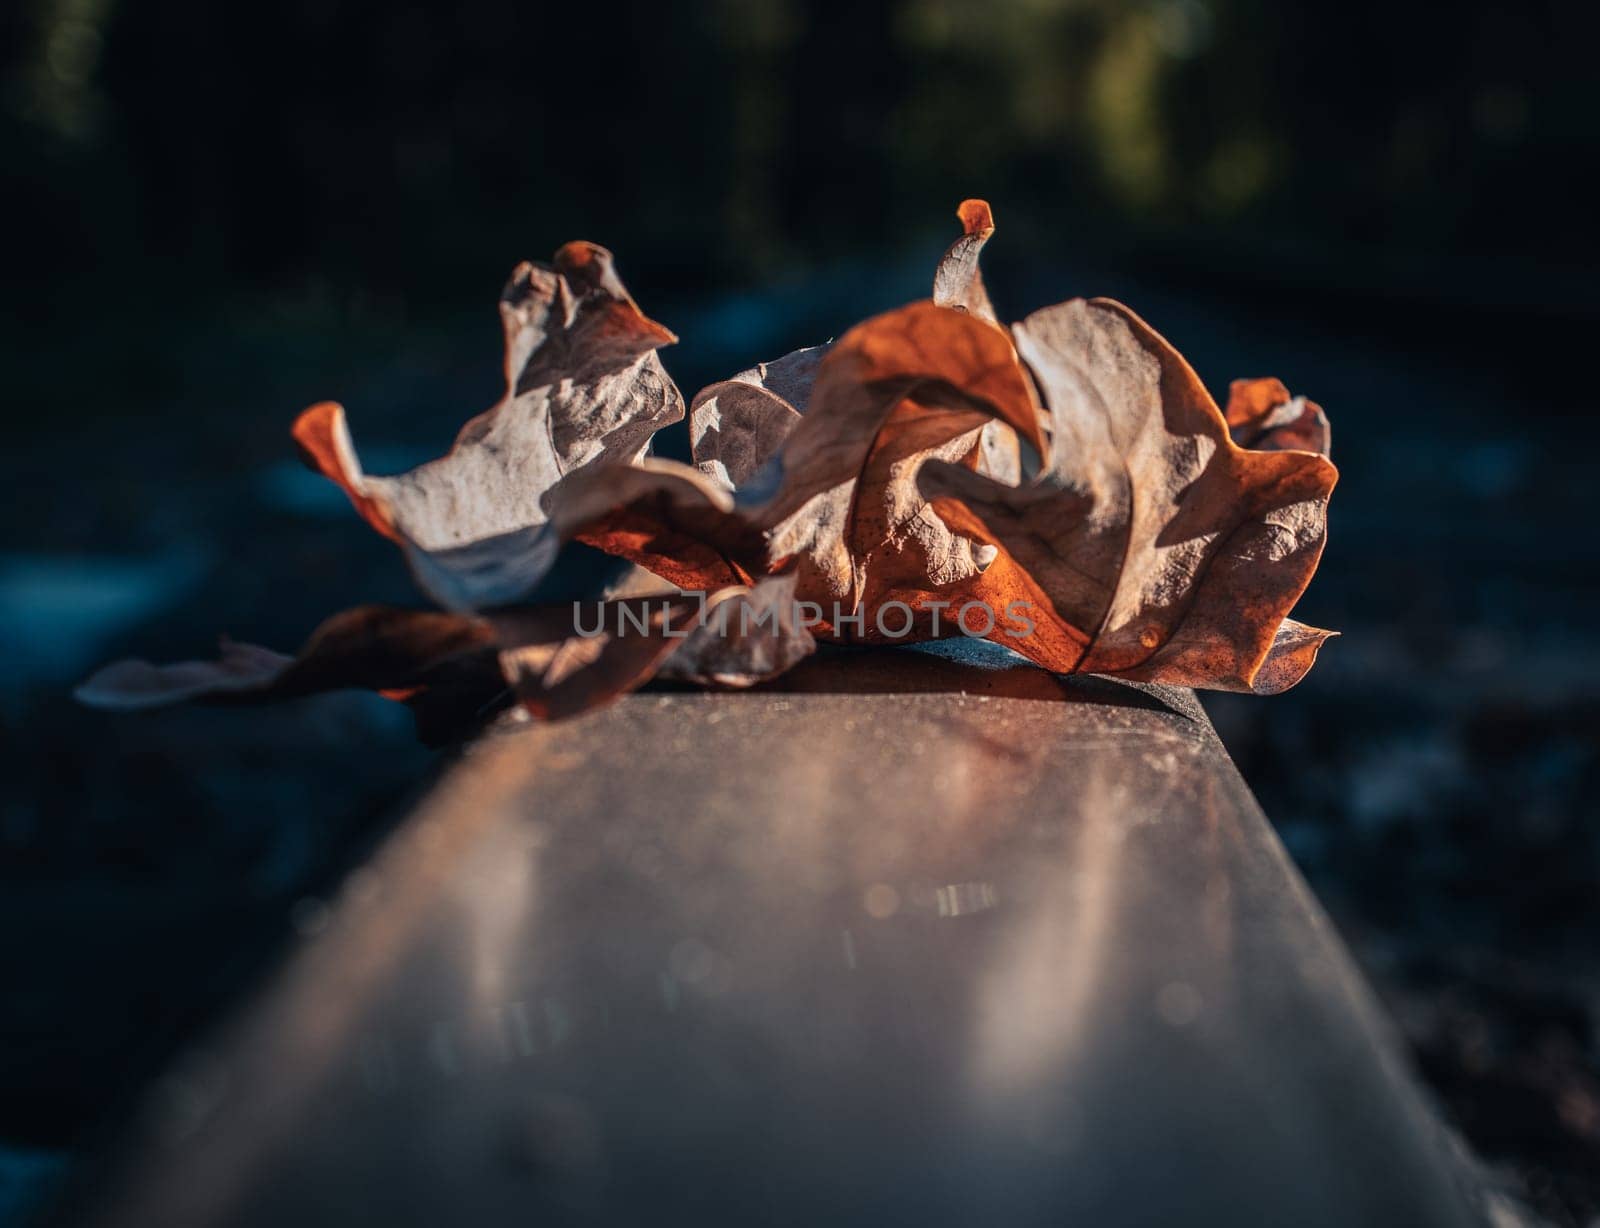 Close up bright oak dry leaf on rails concept photo. Fall season, top view. Majestic scenery of railway road in forest. Beautiful nature scenery photography. High quality picture for wallpaper, travel blog.